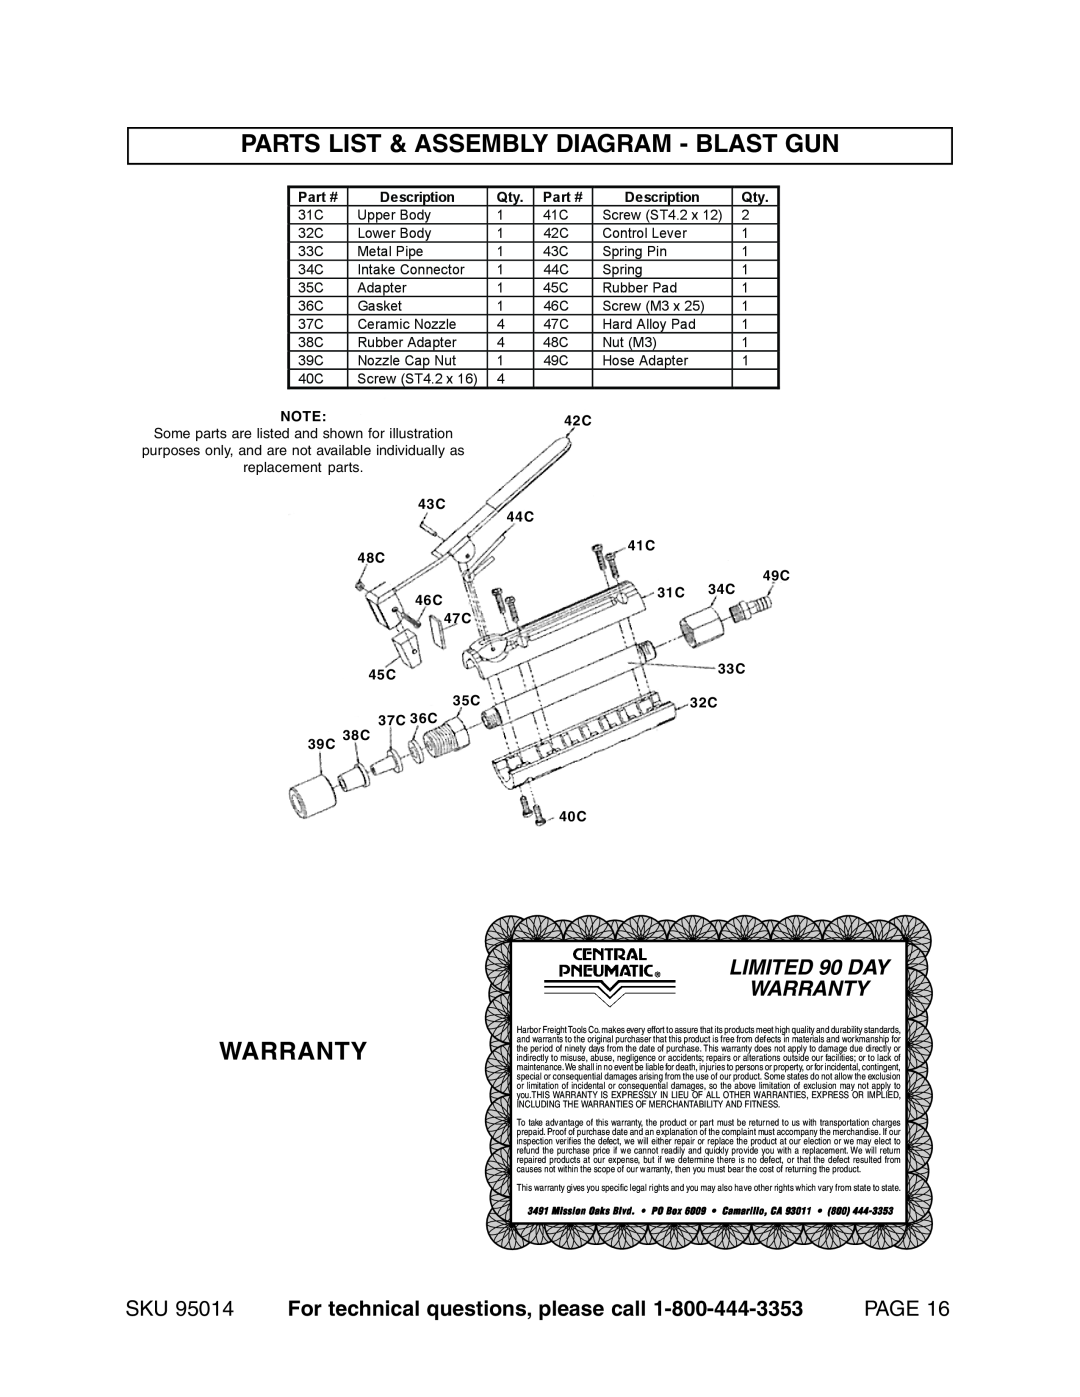 Harbor Freight Tools 95014 Parts List & Assembly Diagram - Blast Gun, Warranty, LIMITED 90 DAY WARRANTY, Page, Description 